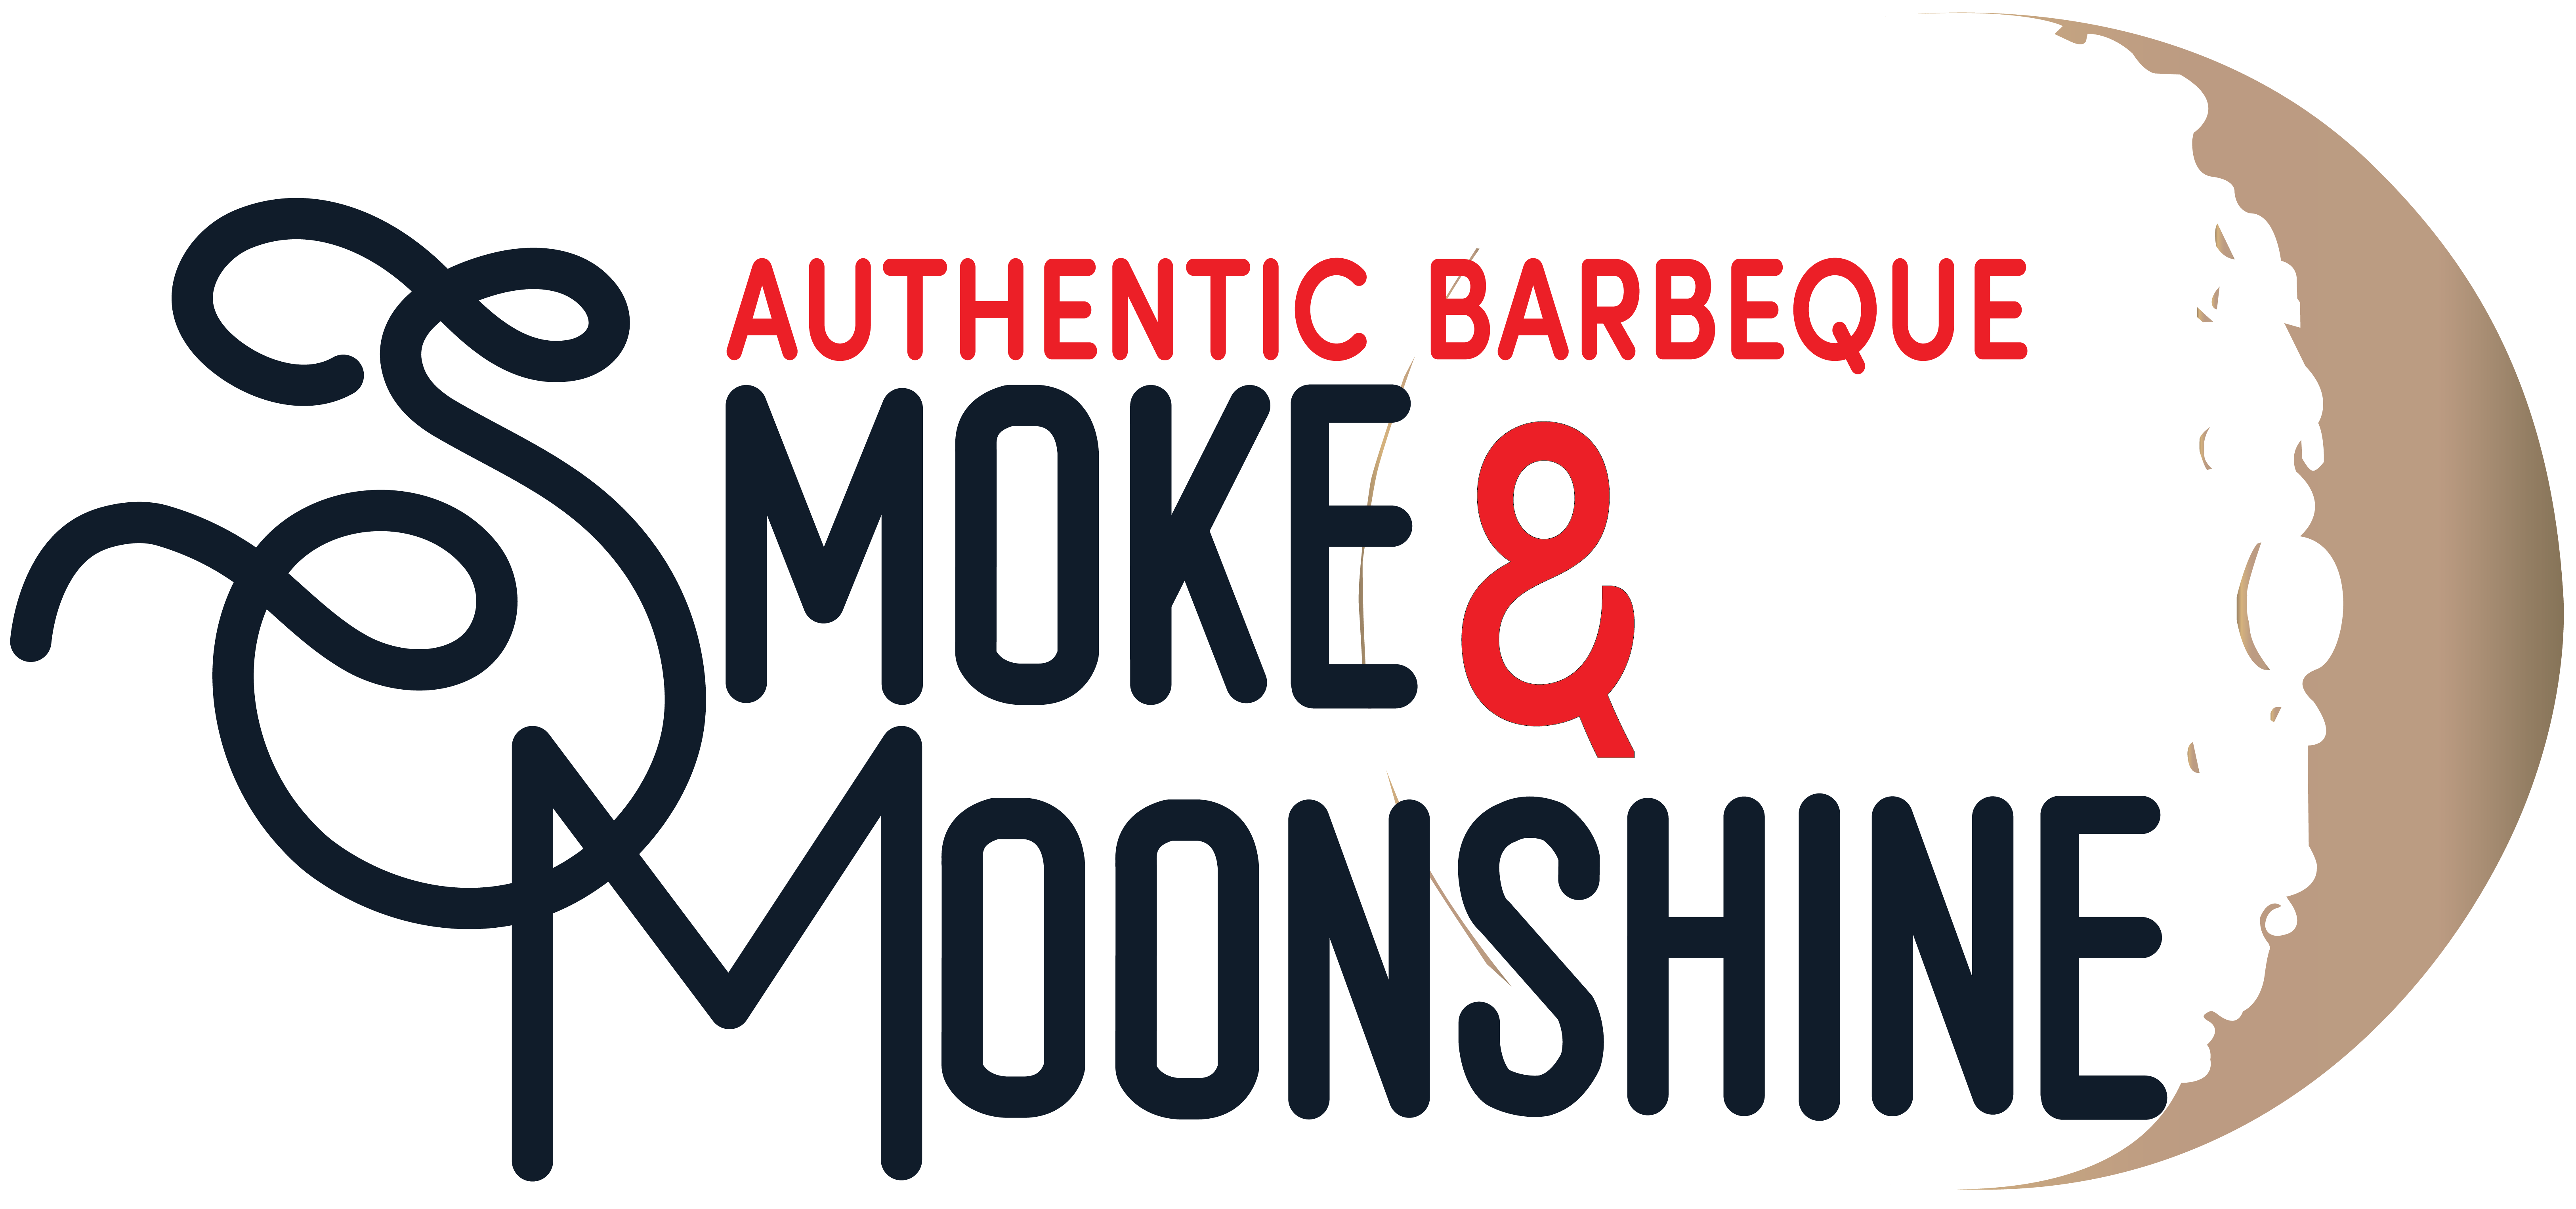 Smoke & Moonshine Authentic Barbeque